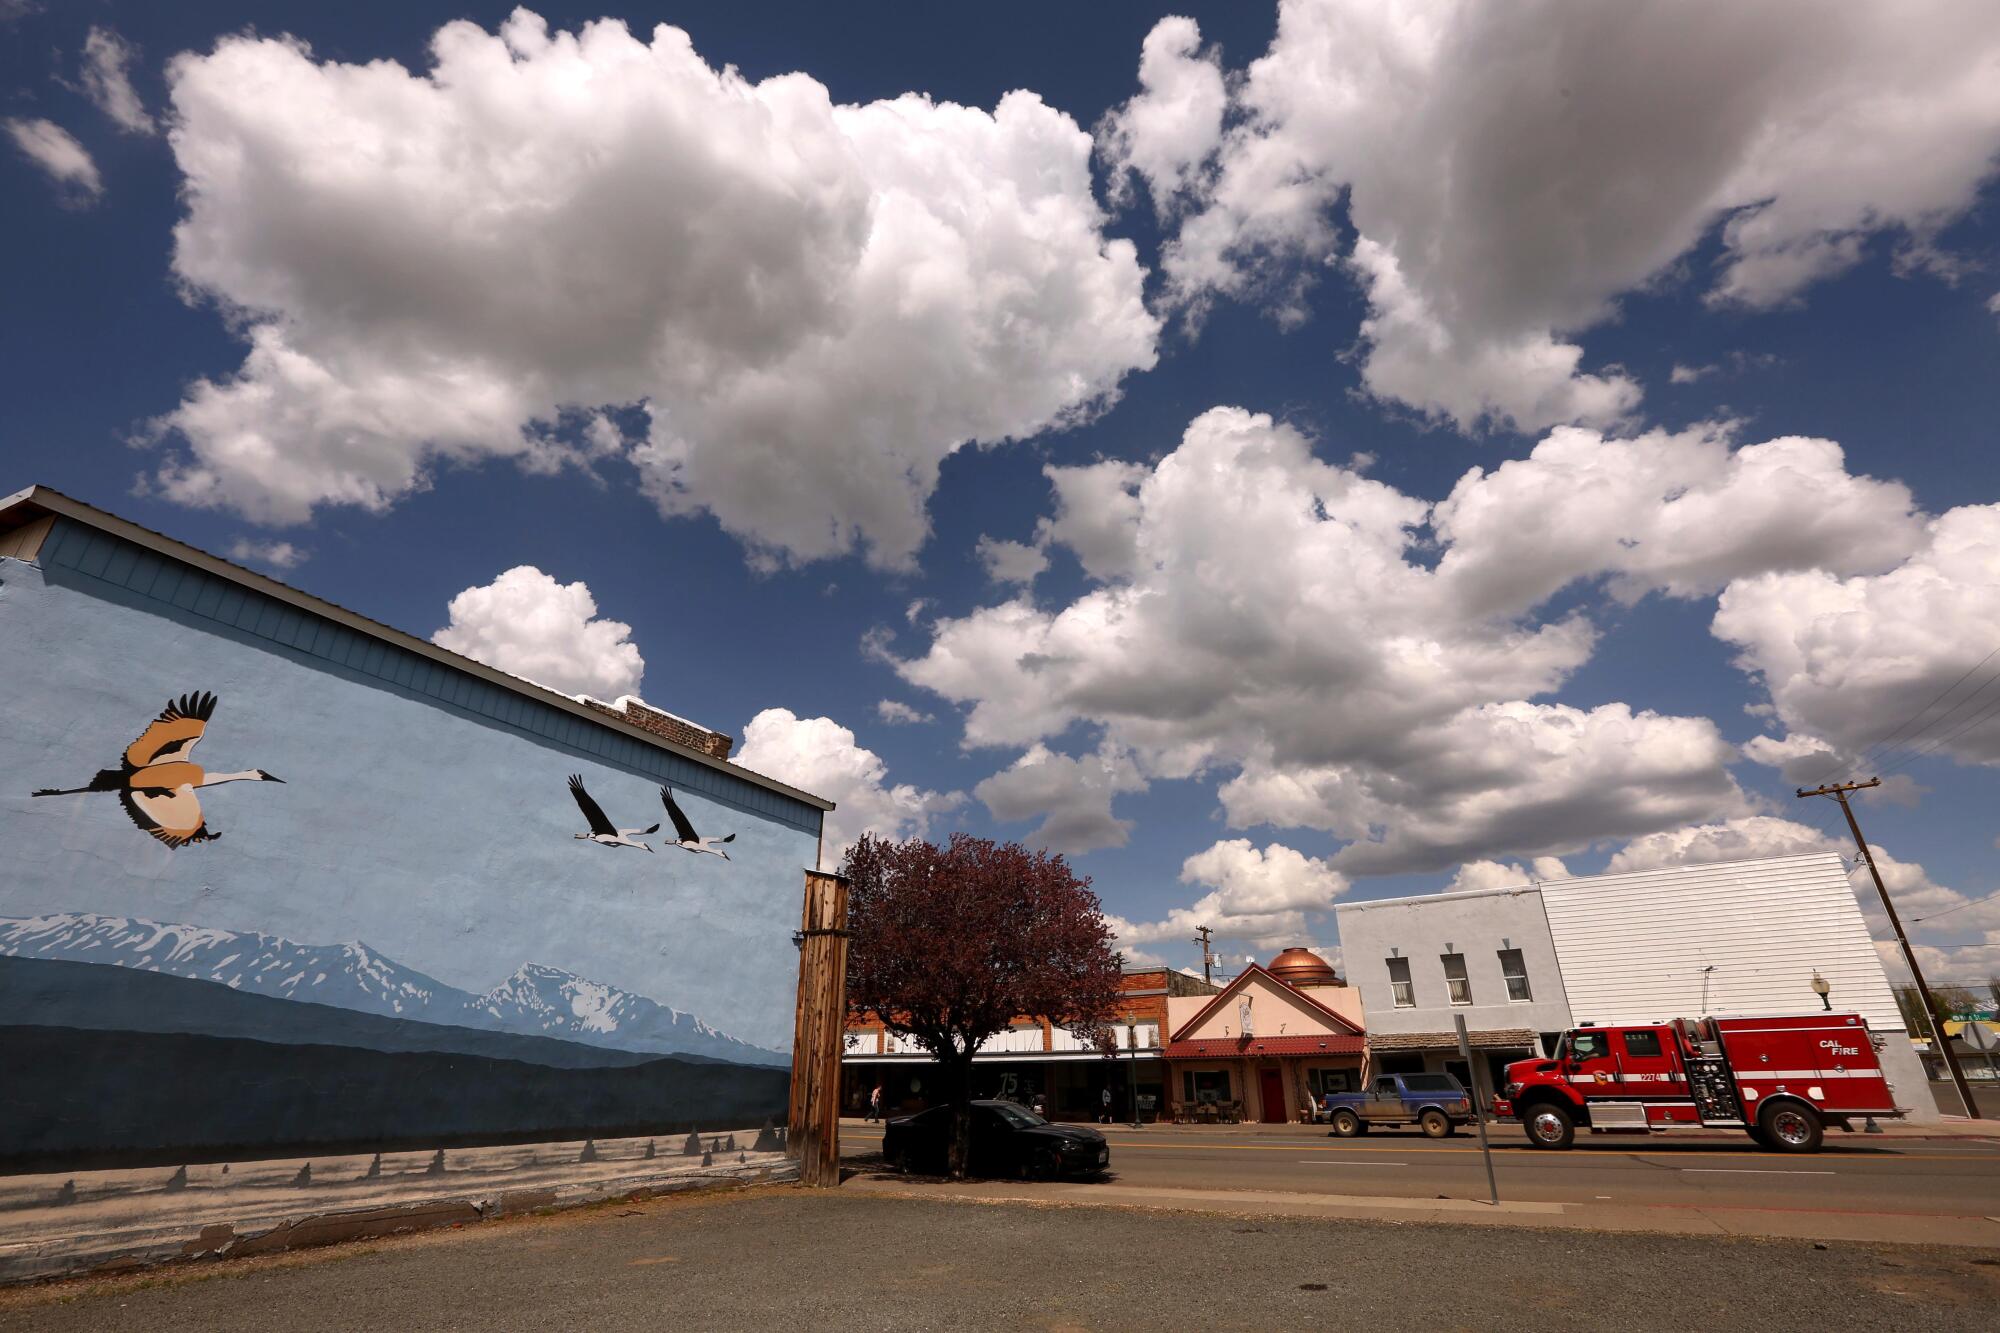 A firetruck makes its way down Main Street against a backdrop of clouds in downtown Alturas.